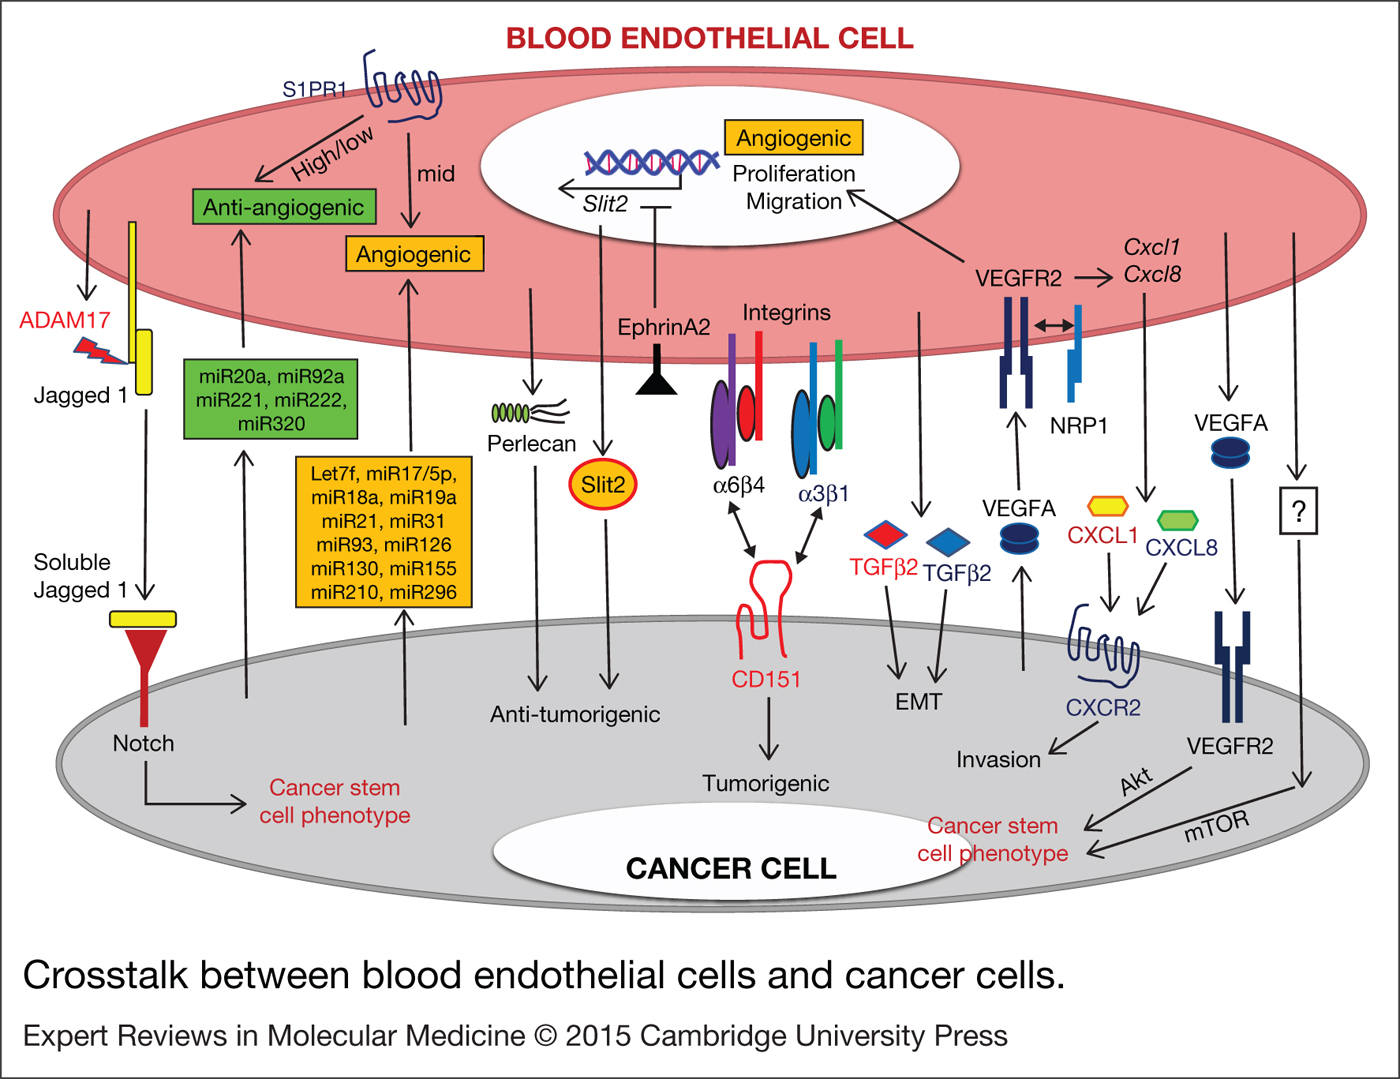 Crosstalk Between Cancer Cells And Blood Endothelial And Lymphatic